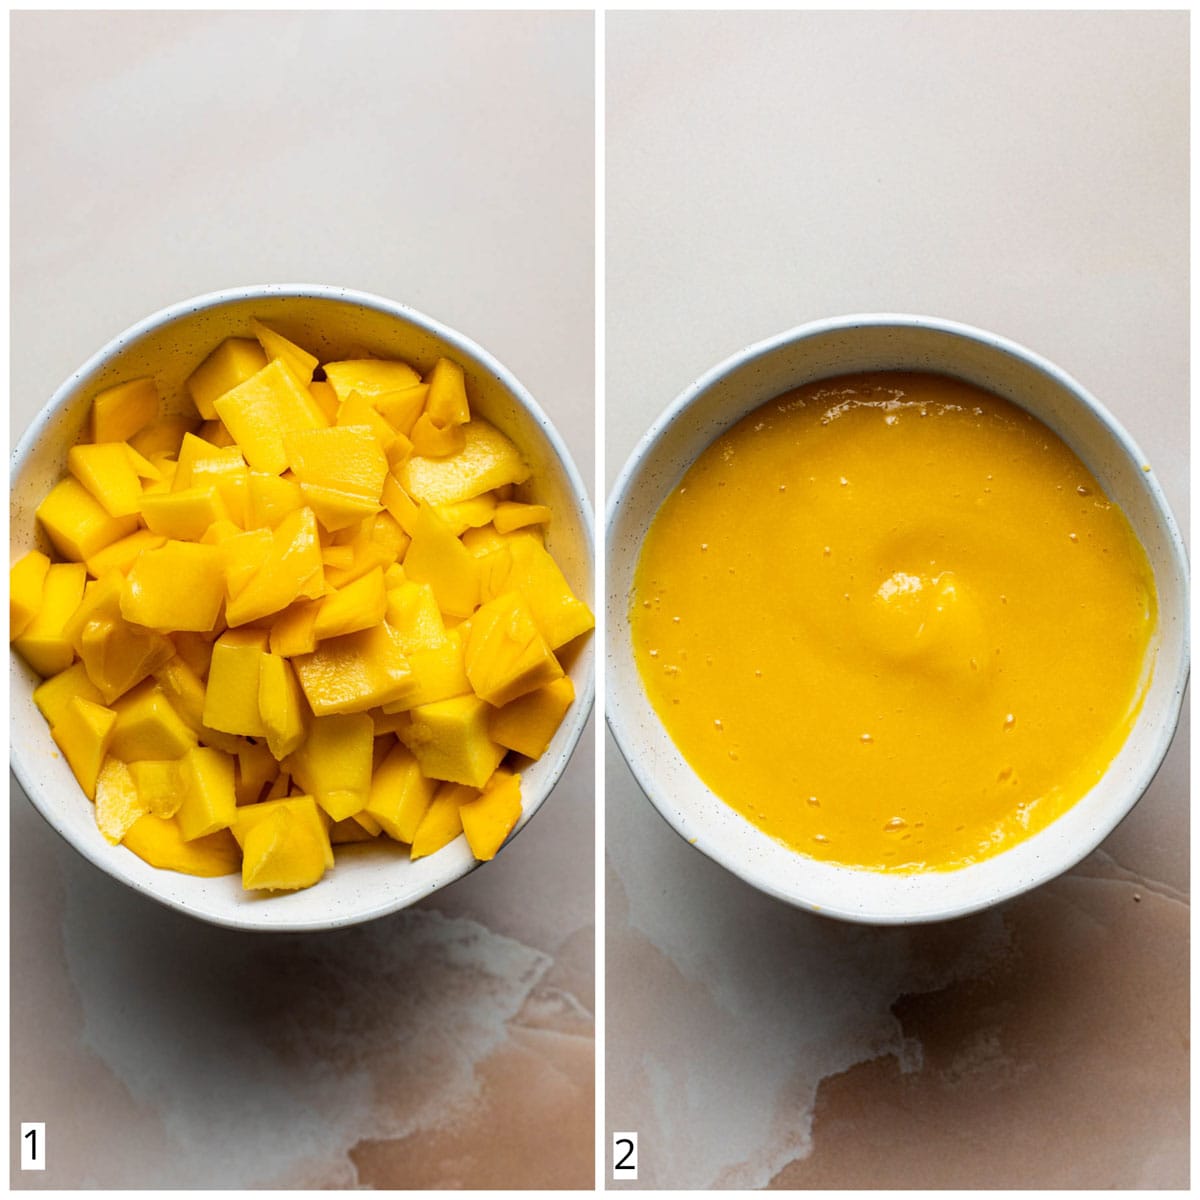 A collage of two images showing cubed mango and mango puree.